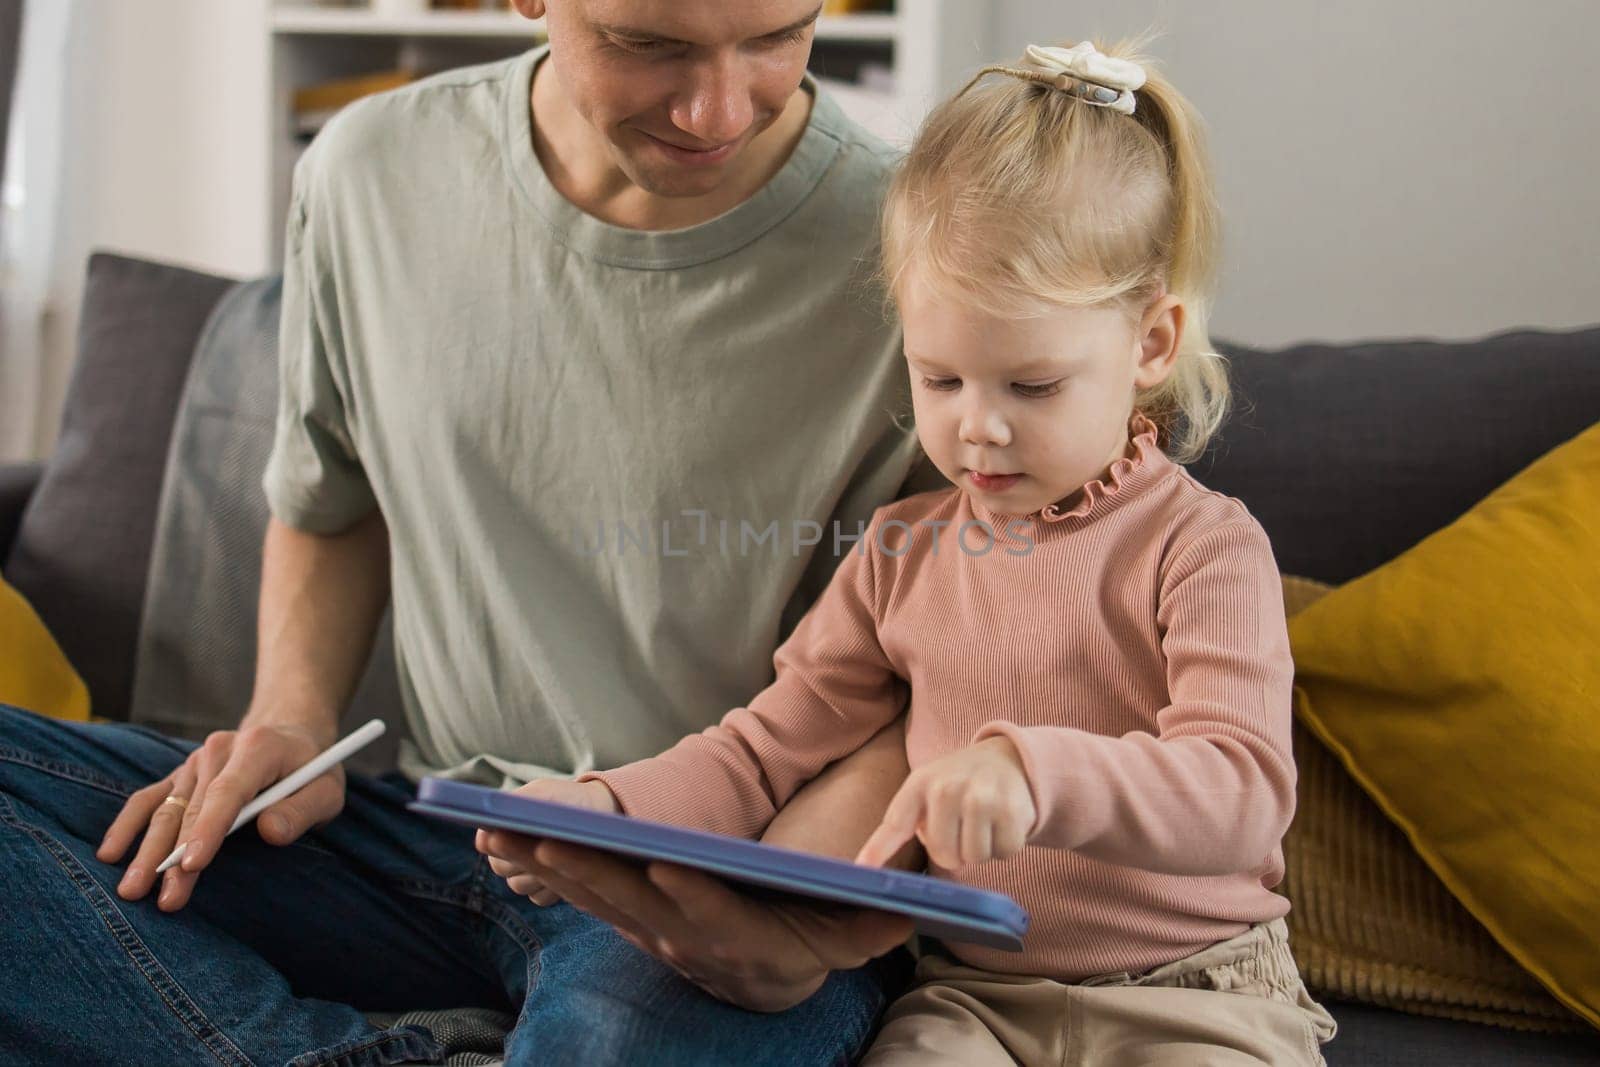 Deaf child girl with cochlear implant studying to hear sounds and have fun with father - recovery after cochlear Implant surgery and rehabilitation concept by Satura86